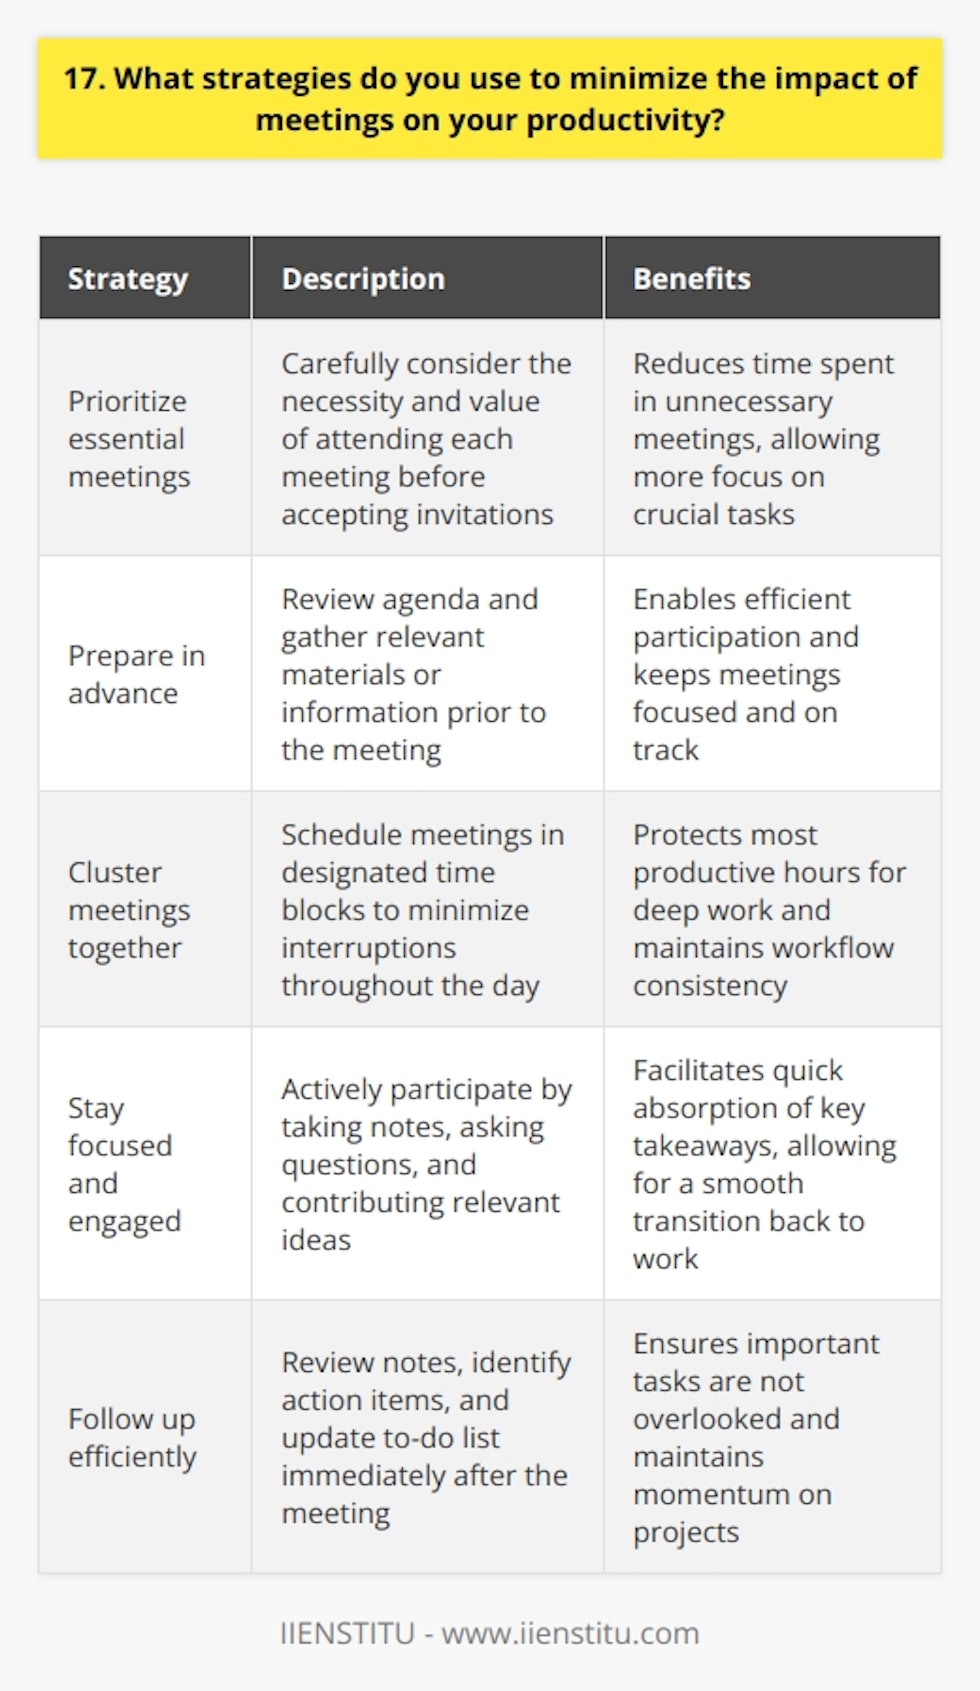 I use several strategies to minimize the impact of meetings on my productivity. First, I prioritize and only attend essential meetings. Before accepting an invitation, I consider if my presence is truly necessary and valuable. Preparing in Advance When I do attend meetings, I come prepared. I review the agenda beforehand and gather any needed materials or information. This allows me to participate efficiently and keeps the meeting focused and on track. Scheduling Techniques Im also strategic about when I schedule meetings. I try to cluster them together to avoid constant interruptions throughout the day. For example, I might designate certain afternoons as  meeting blocks  to protect my most productive morning hours. Staying Focused and Engaged During the meeting itself, I stay focused and engaged. I take notes, ask questions, and contribute relevant ideas. Active participation helps me absorb the key takeaways quickly, so I can jump back into my work afterwards. Following Up Efficiently After the meeting ends, I take a moment to review my notes and identify any action items or next steps. I update my to-do list right away so important tasks dont slip through the cracks. Protecting Deep Work Time Finally, I fiercely protect blocks of uninterrupted  deep work  time for tackling my most cognitively-demanding tasks. I treat these focused sessions as sacred and avoid scheduling any meetings during these periods whenever possible. By being intentional about which meetings I attend and how I engage in them, I can minimize their impact on my overall productivity. Its an ongoing balancing act, but these strategies help me make the most of my time and energy.